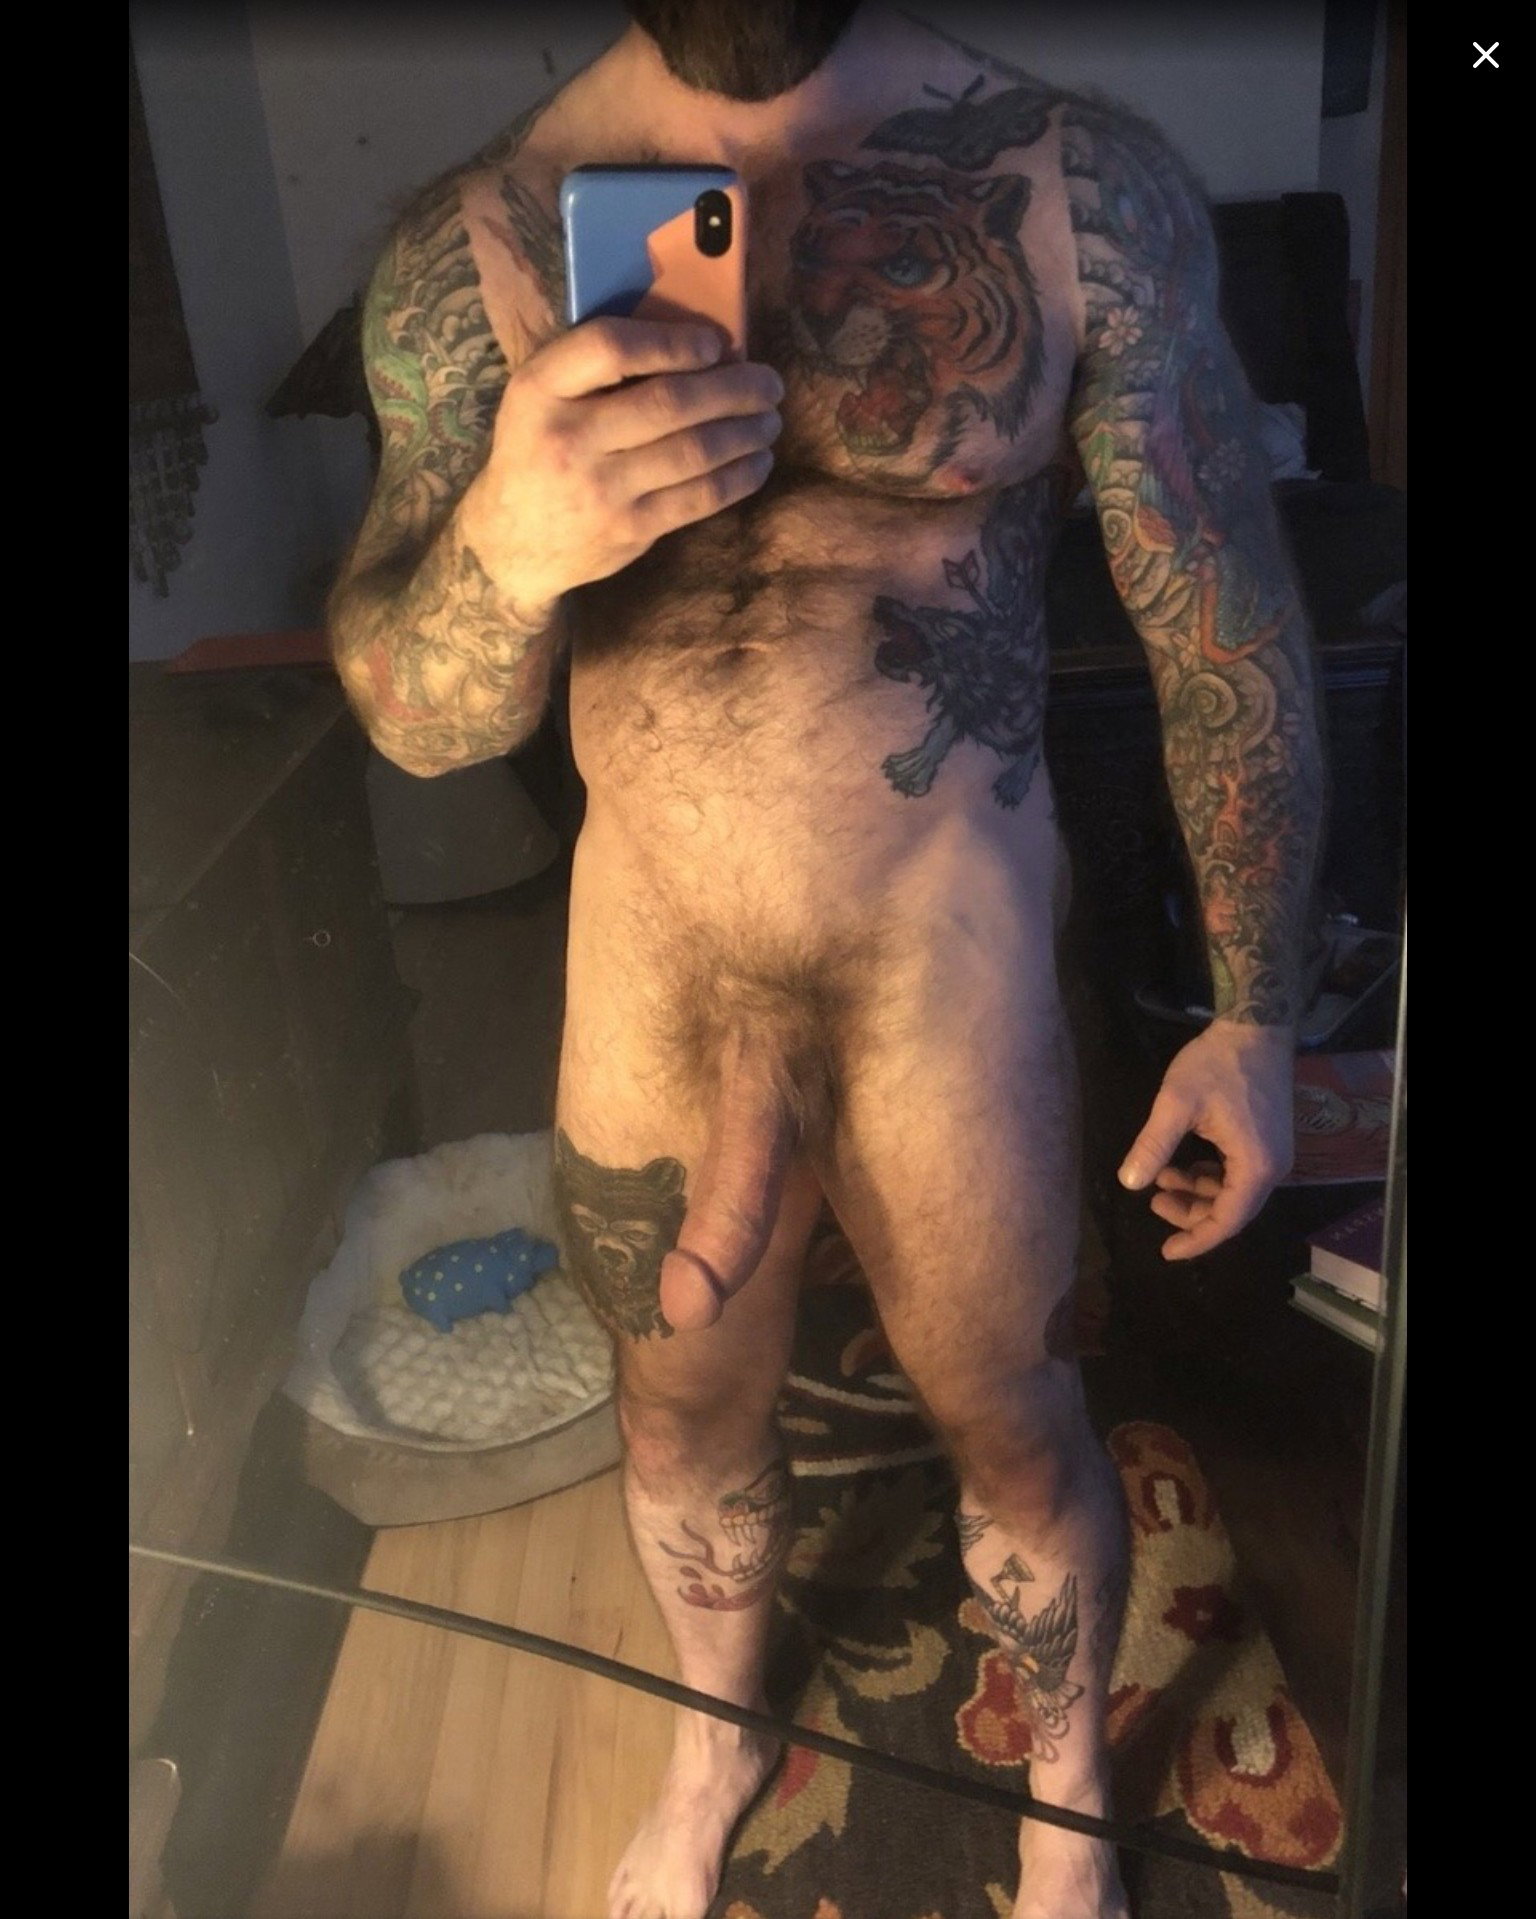 Shared Photo by Bigred8 with the username @Bigred8,  July 21, 2019 at 2:28 PM and the text says 'Y’all should follow @bigred8 ... great material and he’s hot AF.  Seriously, look at that monster Vick and the tatts!'